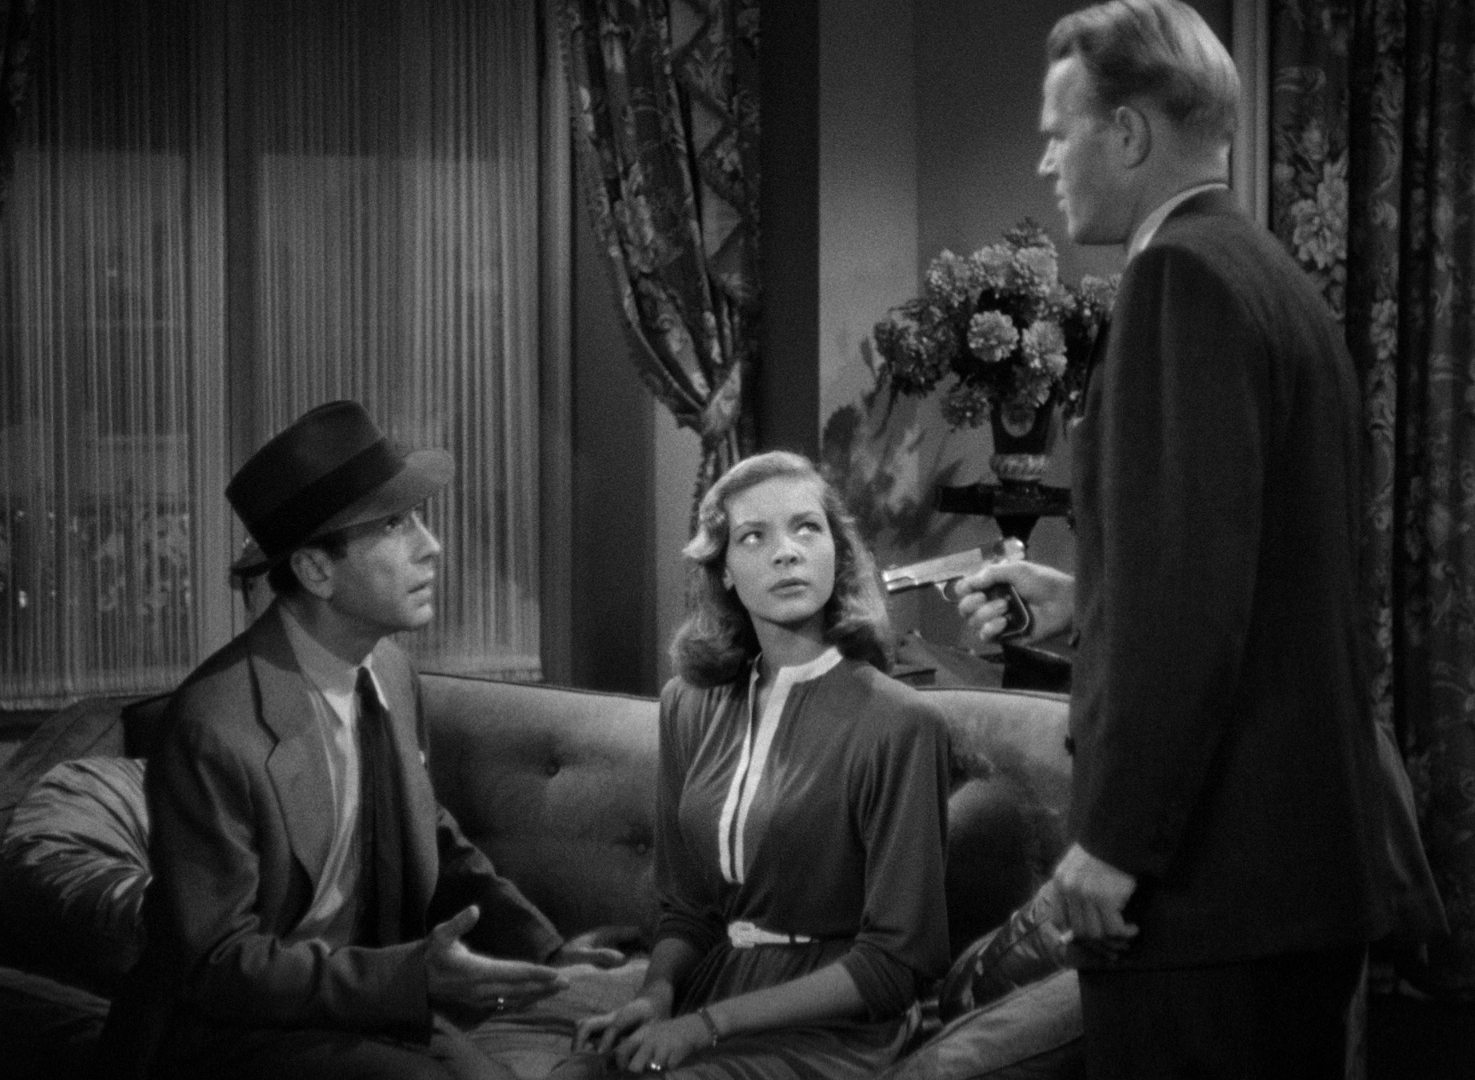 Black-and-white scene with Humphrey Bogart and Lauren Bacall in a flat on a couch, both looking up at a man with a drawn pistol.